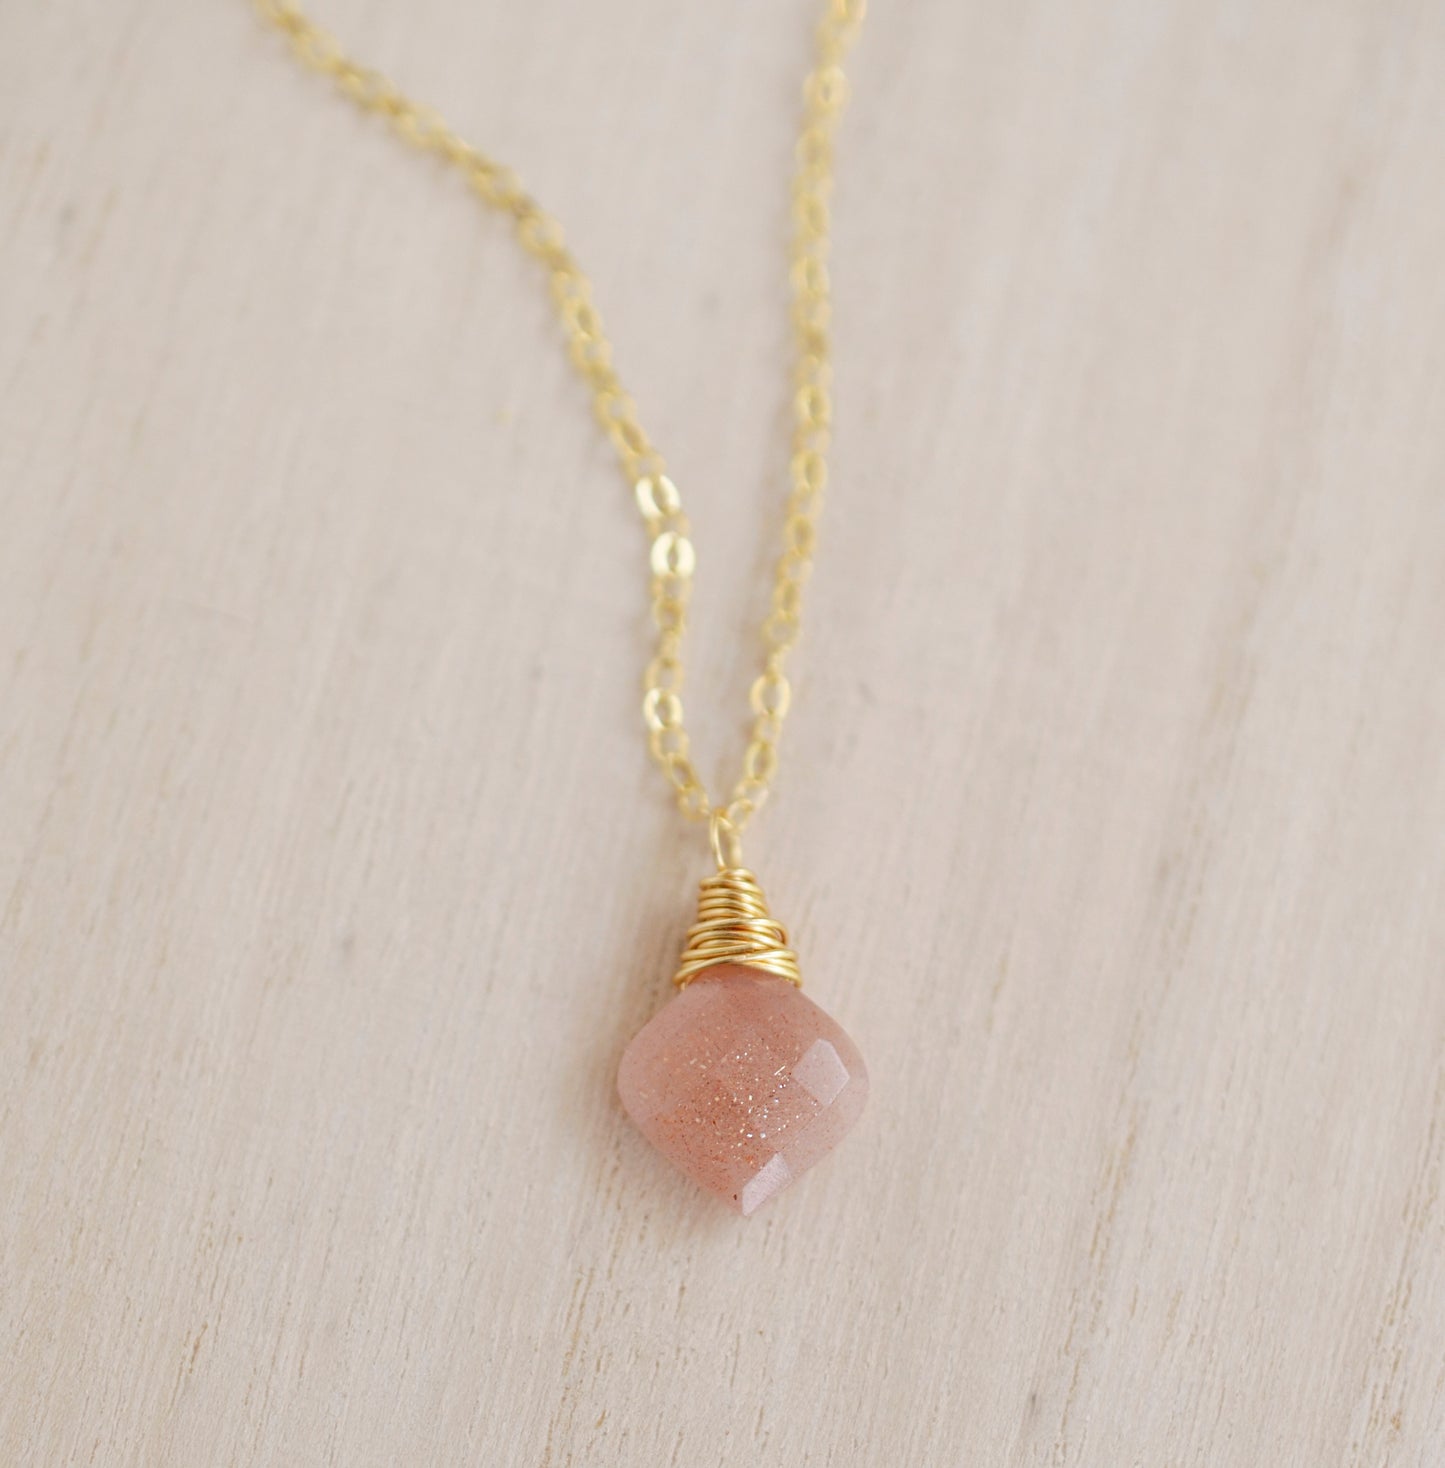 Peach Sunstone Necklace - 14k Gold Fill or Sterling Silver - Natural Sunstone - Wire Wrapped Gemstone Pendant - Peach Wedding Jewelry